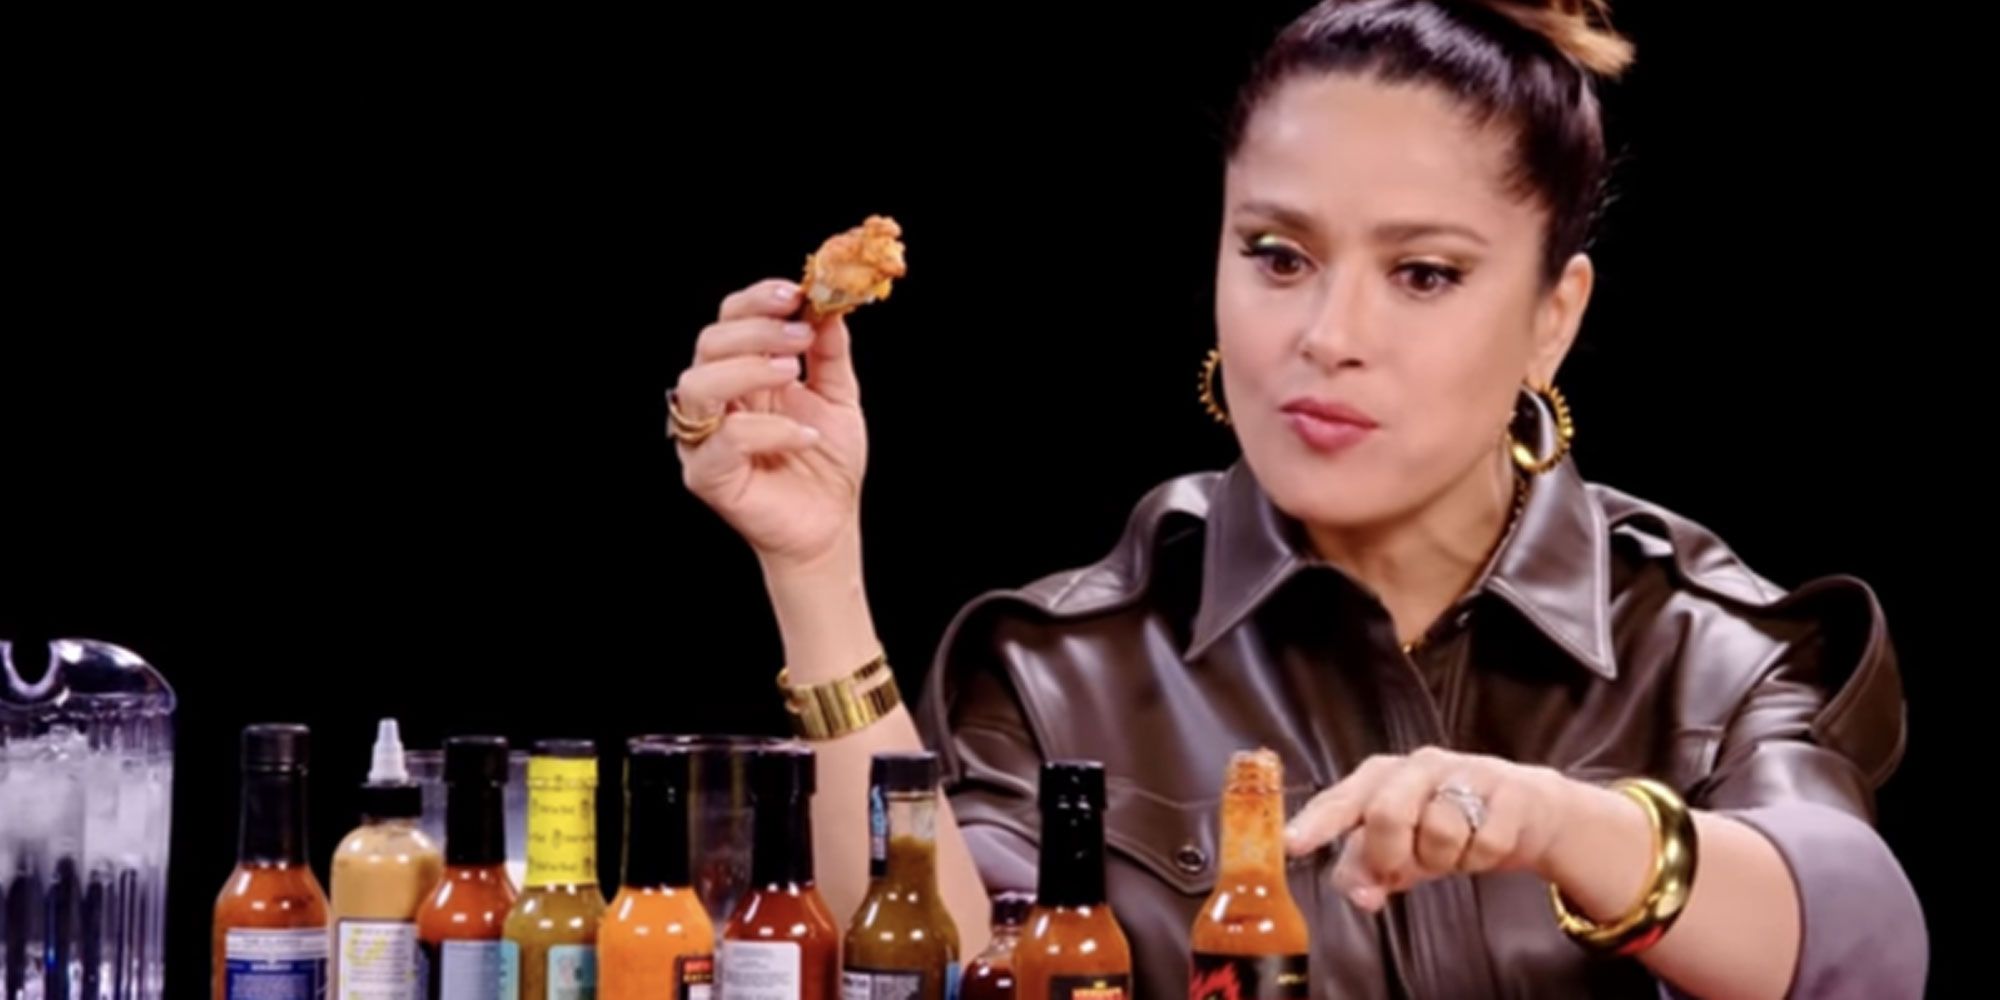 Salma Hayek holding a chicken wing on Hot Ones